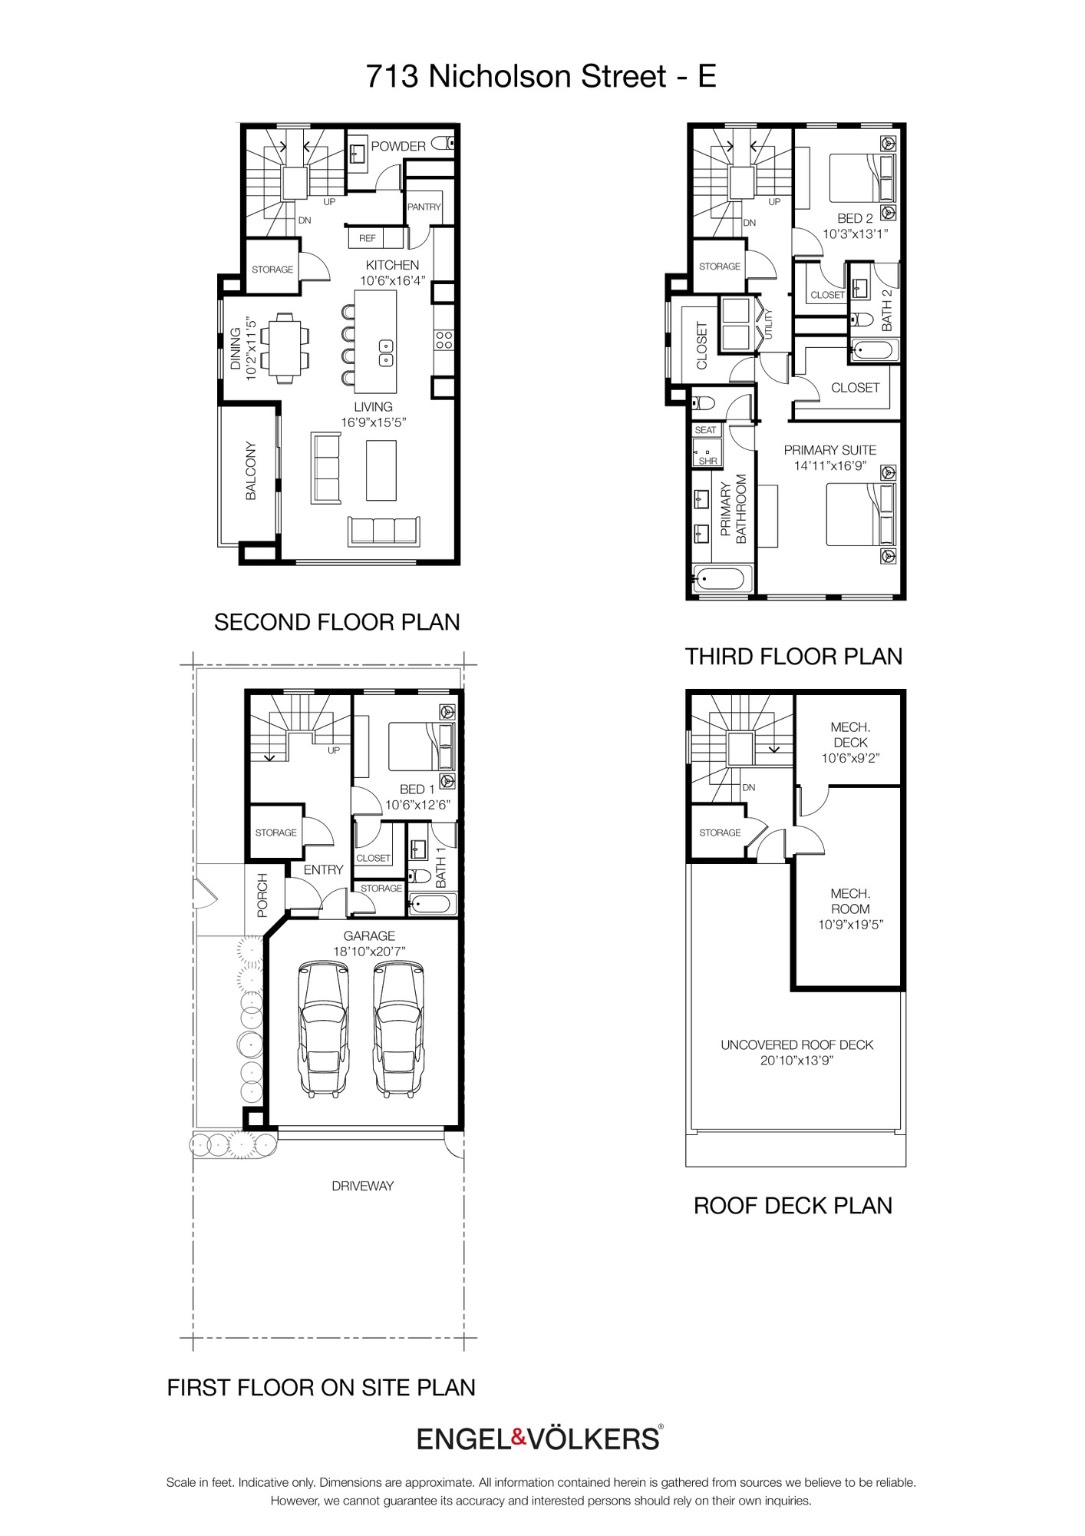 The first floor houses a bedroom, storage, and a two-car garage. The second floor offers an open-plan living area, kitchen, dining space, and balcony. The third floor comprises a primary suite with en-suite and a second bedroom with a bath. The rooftop features a deck and mechanical room.